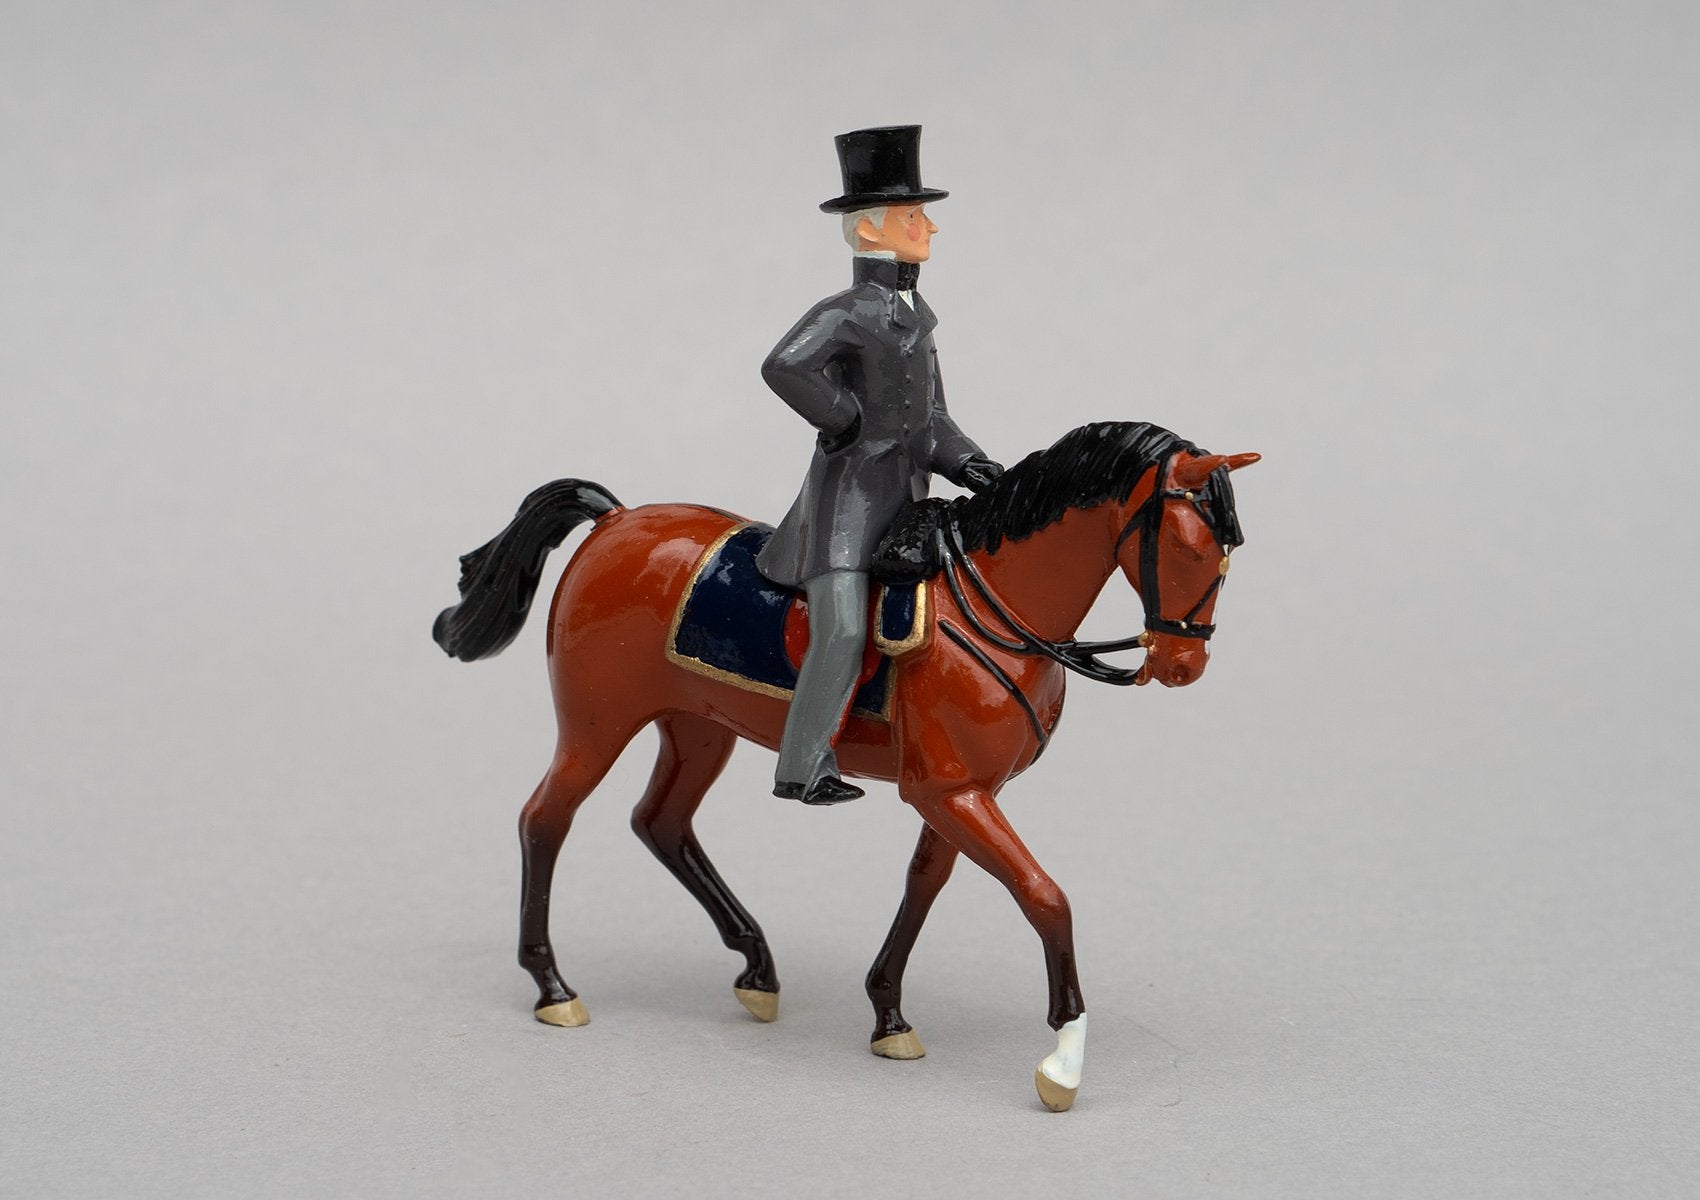 Set 113 General Picton, Waterloo, 1815 | British | Napoleonic Wars | Killed at Waterloo while leading the 5th Infantry Division. Single mounted officer on bay horse | Waterloo | © Imperial Productions | Sculpt by David Cowe